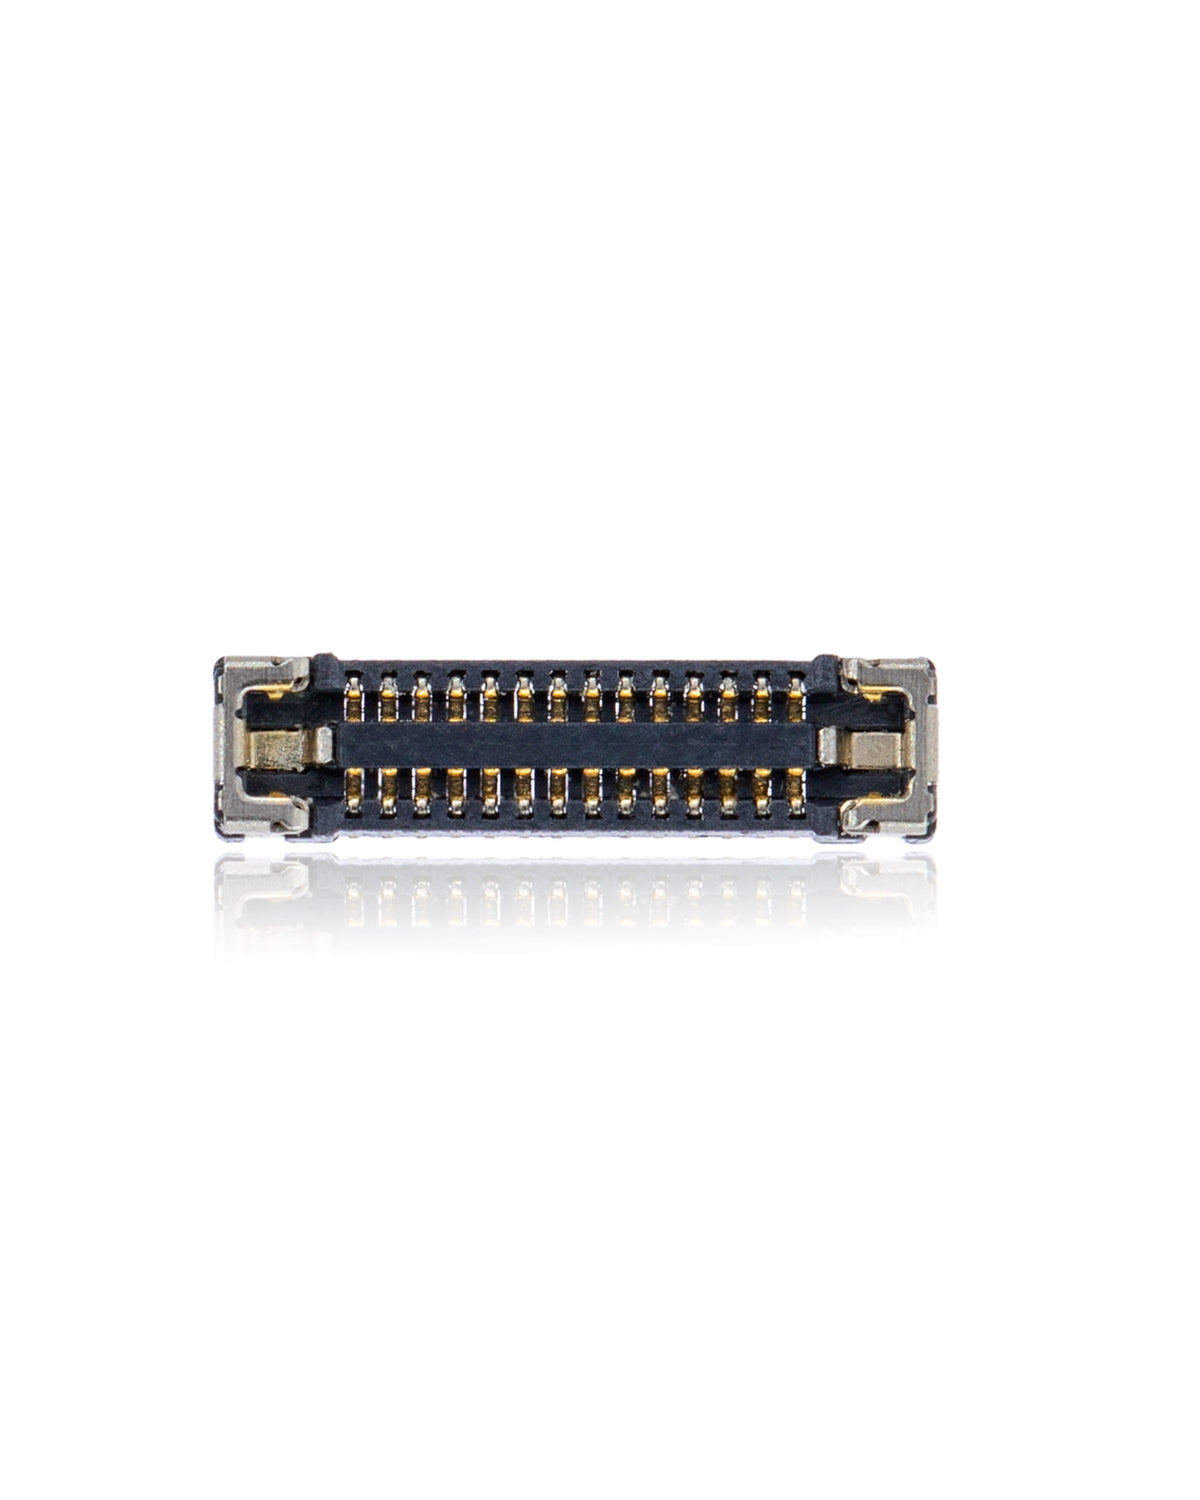 3D TOUCH FPC CONNECTOR COMPATIBLE WITH IPHONE X / XS / XS MAX (J5800: 28 PIN)